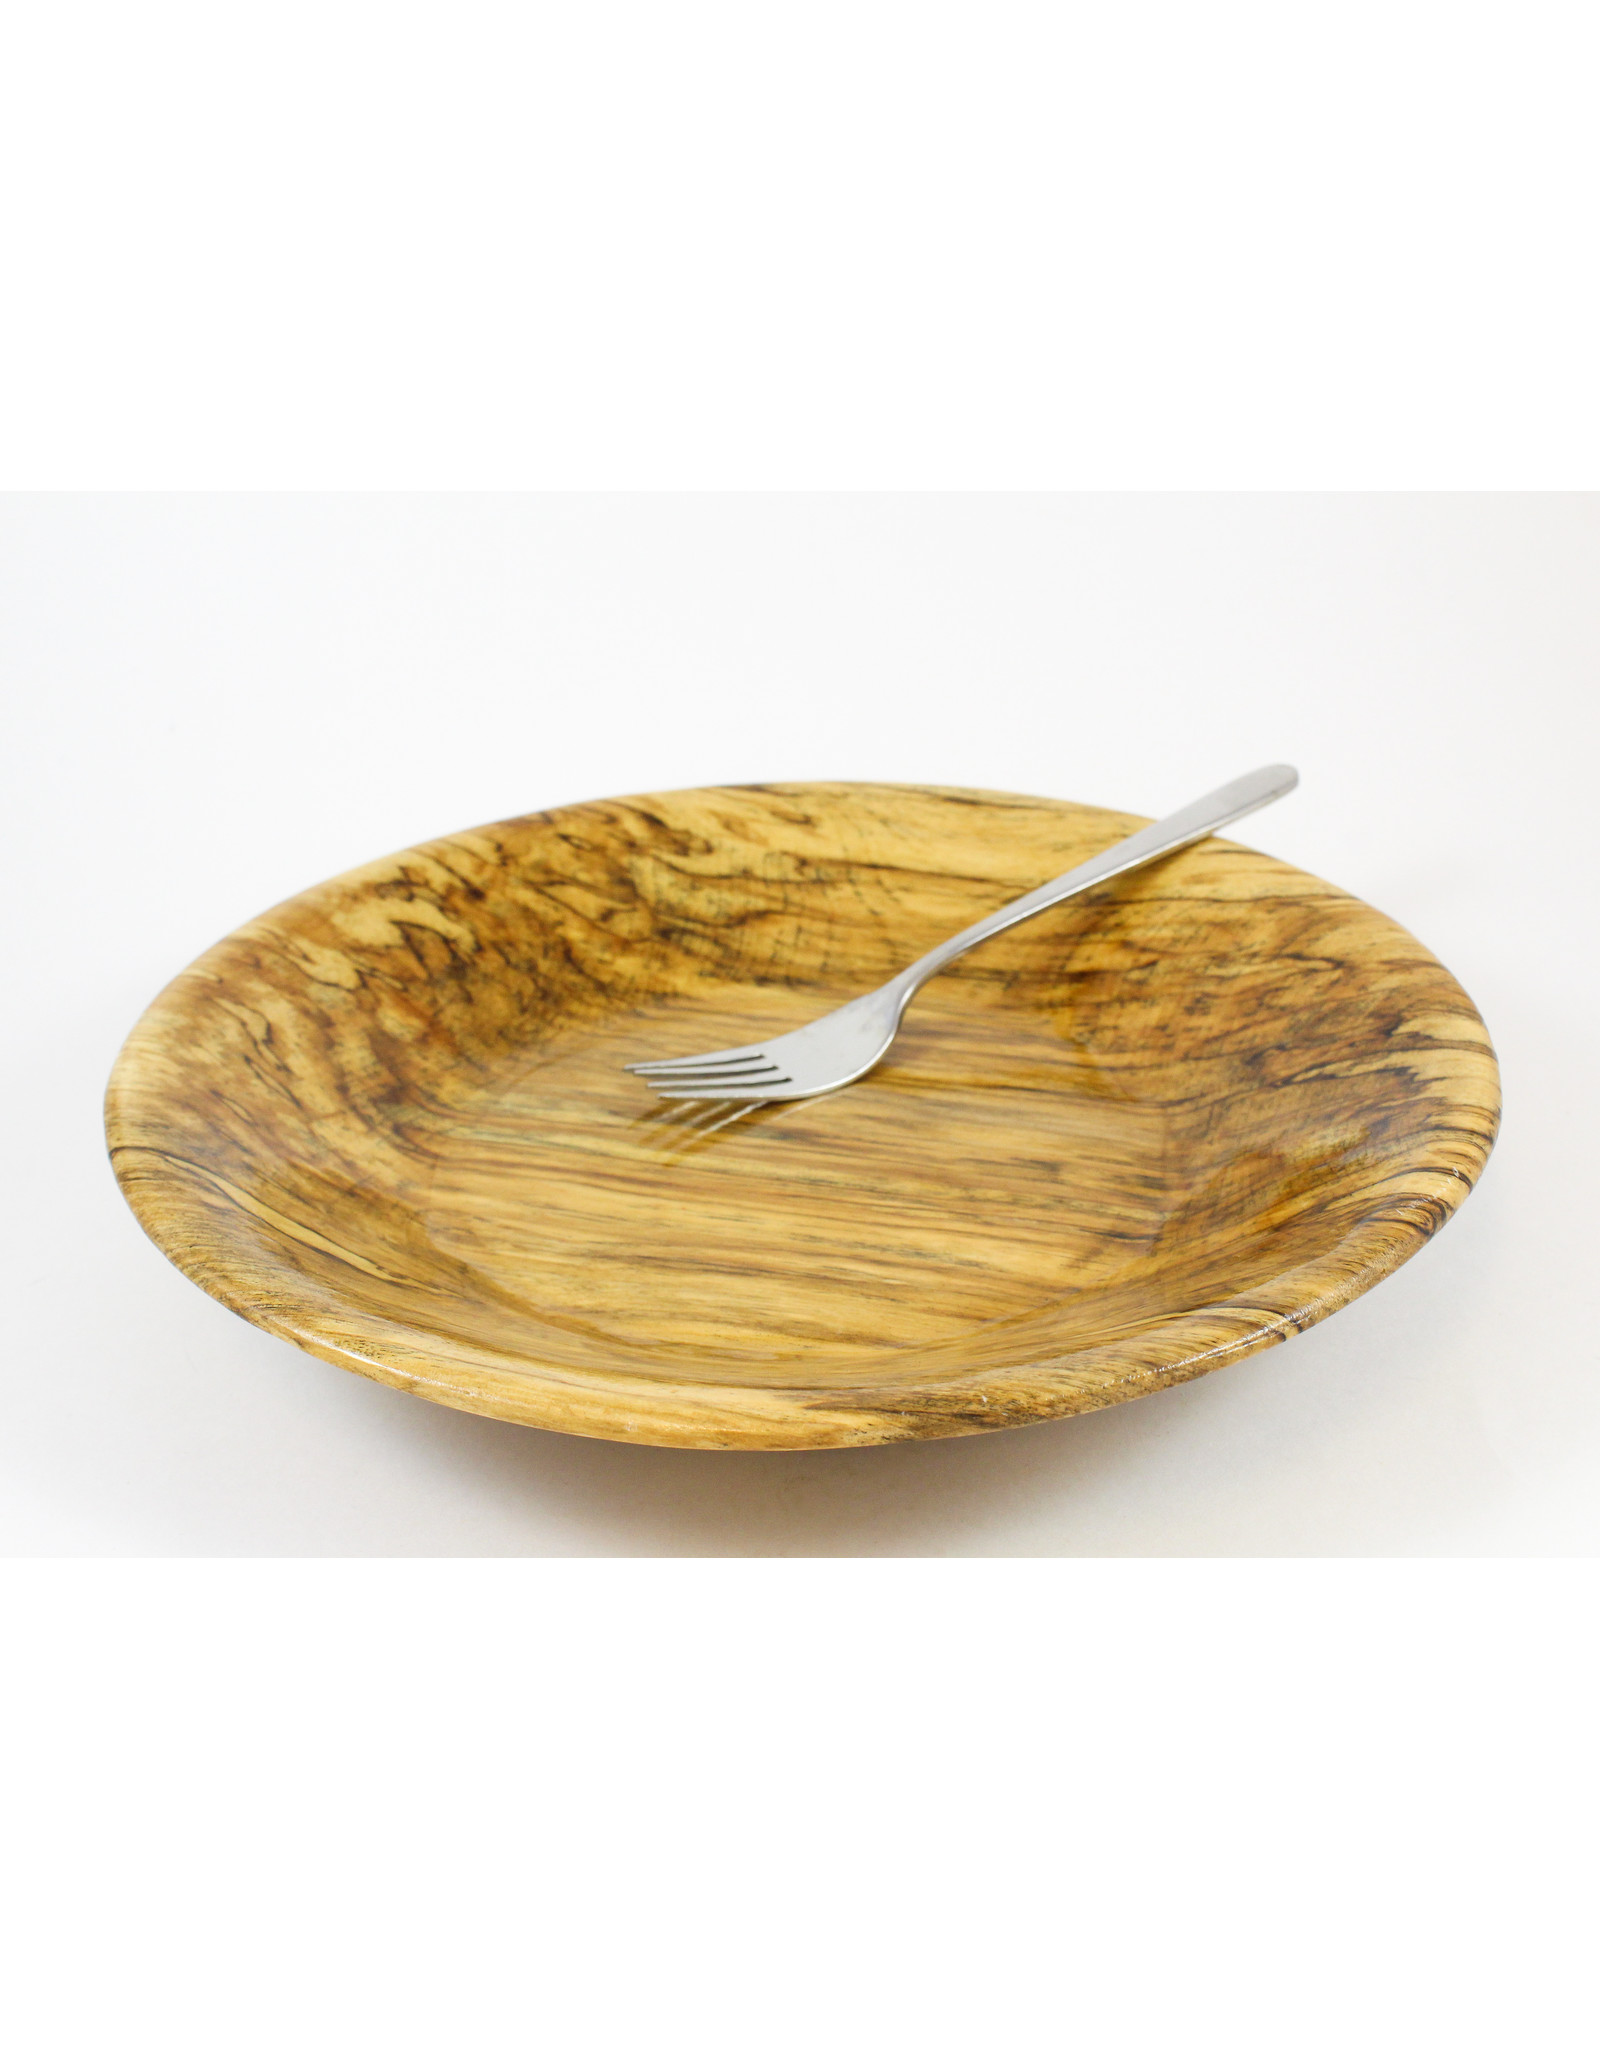 Phil Jones - The Bowl Guy Shallow Spalted Maple Bowl by The Bowl Guy